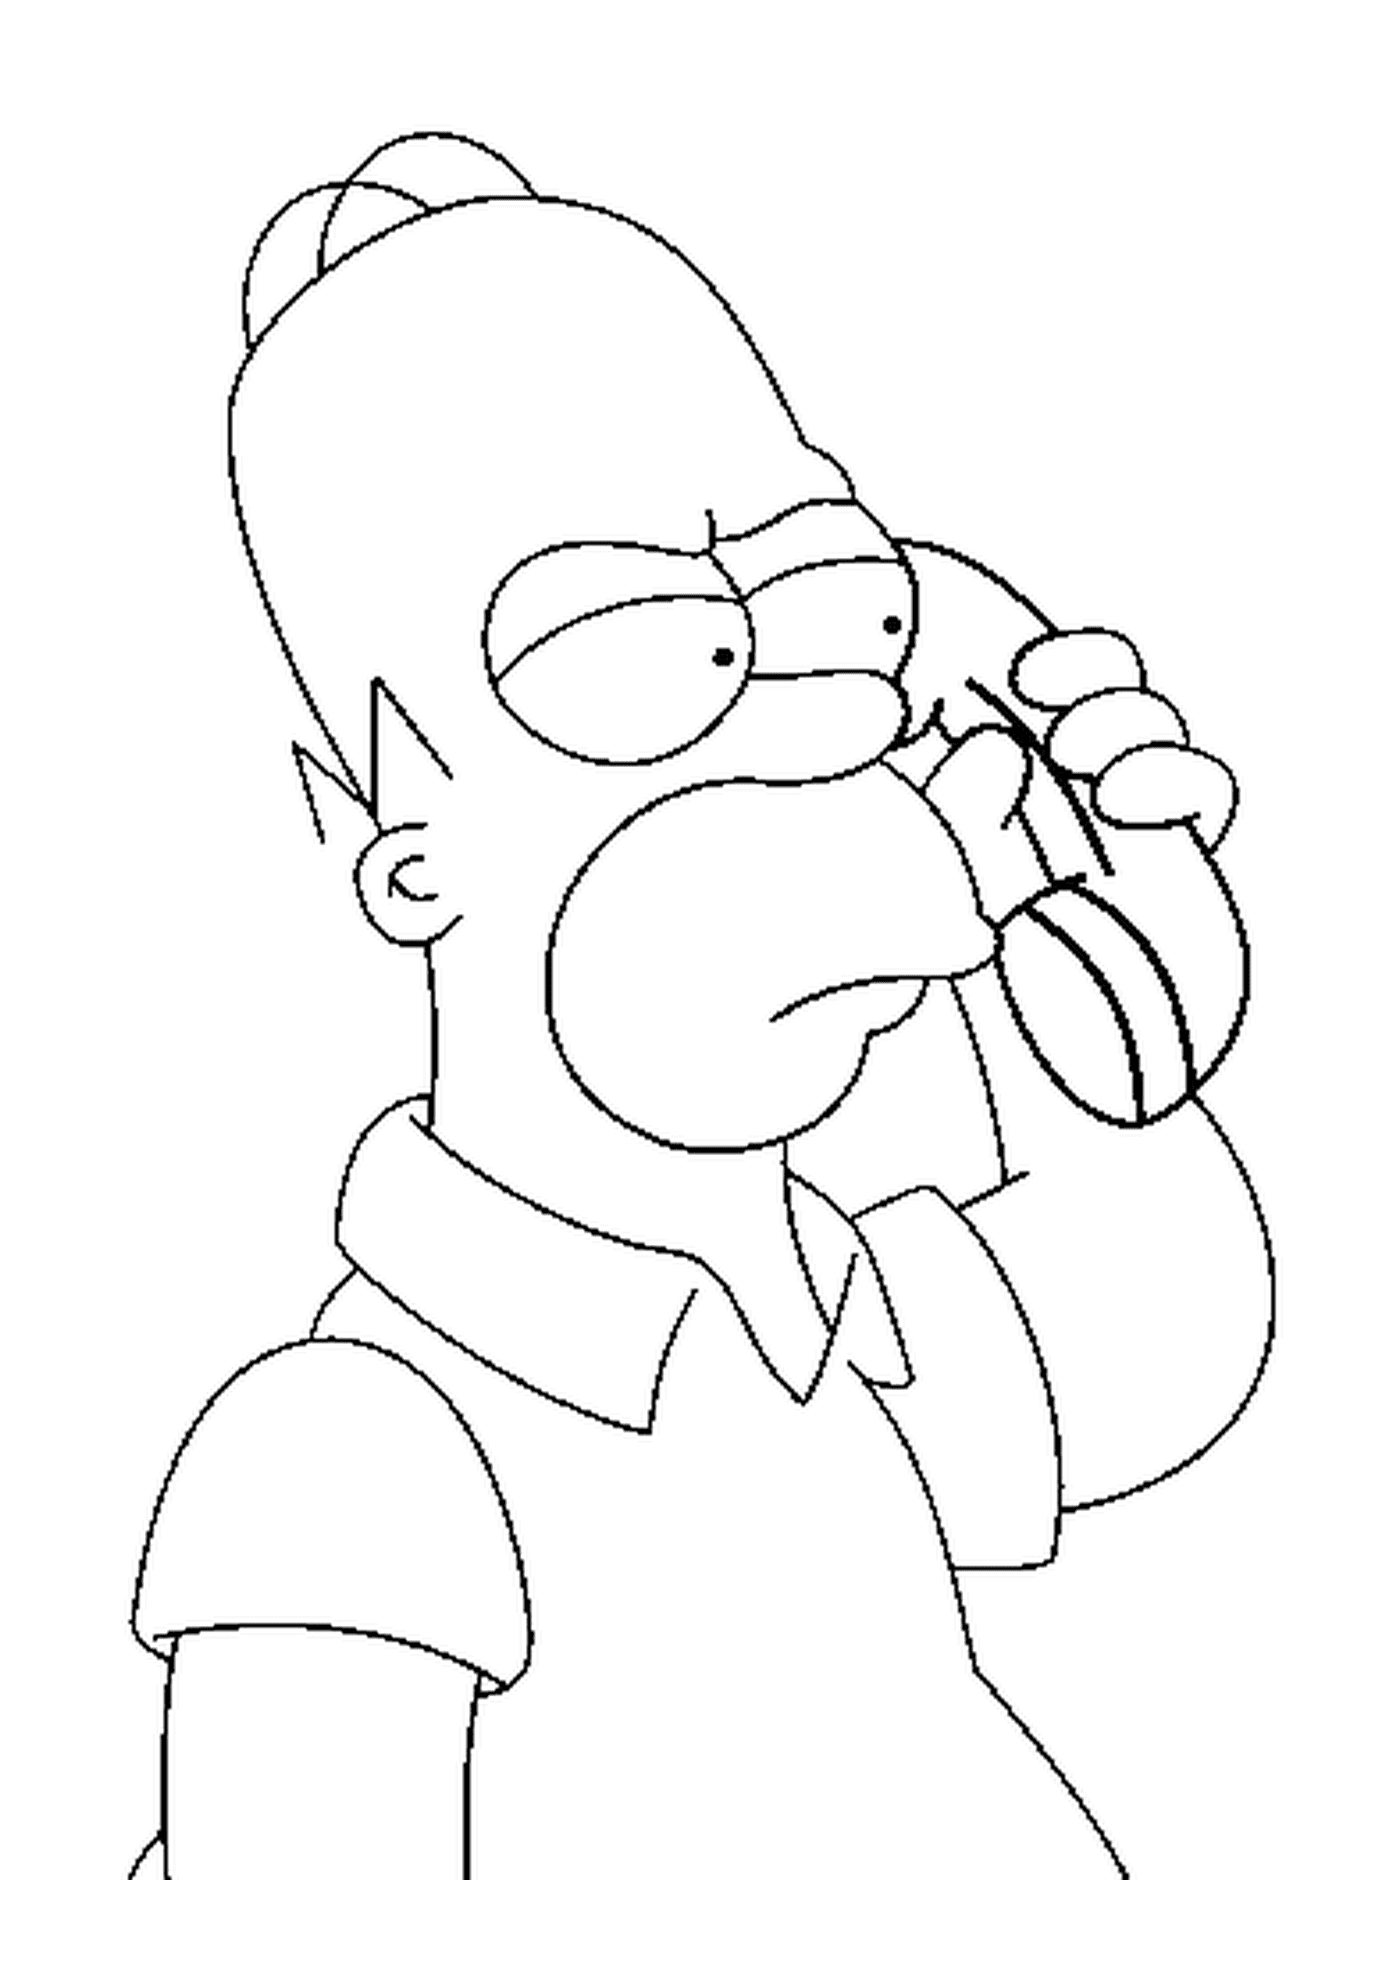  Homer's talking on the phone 